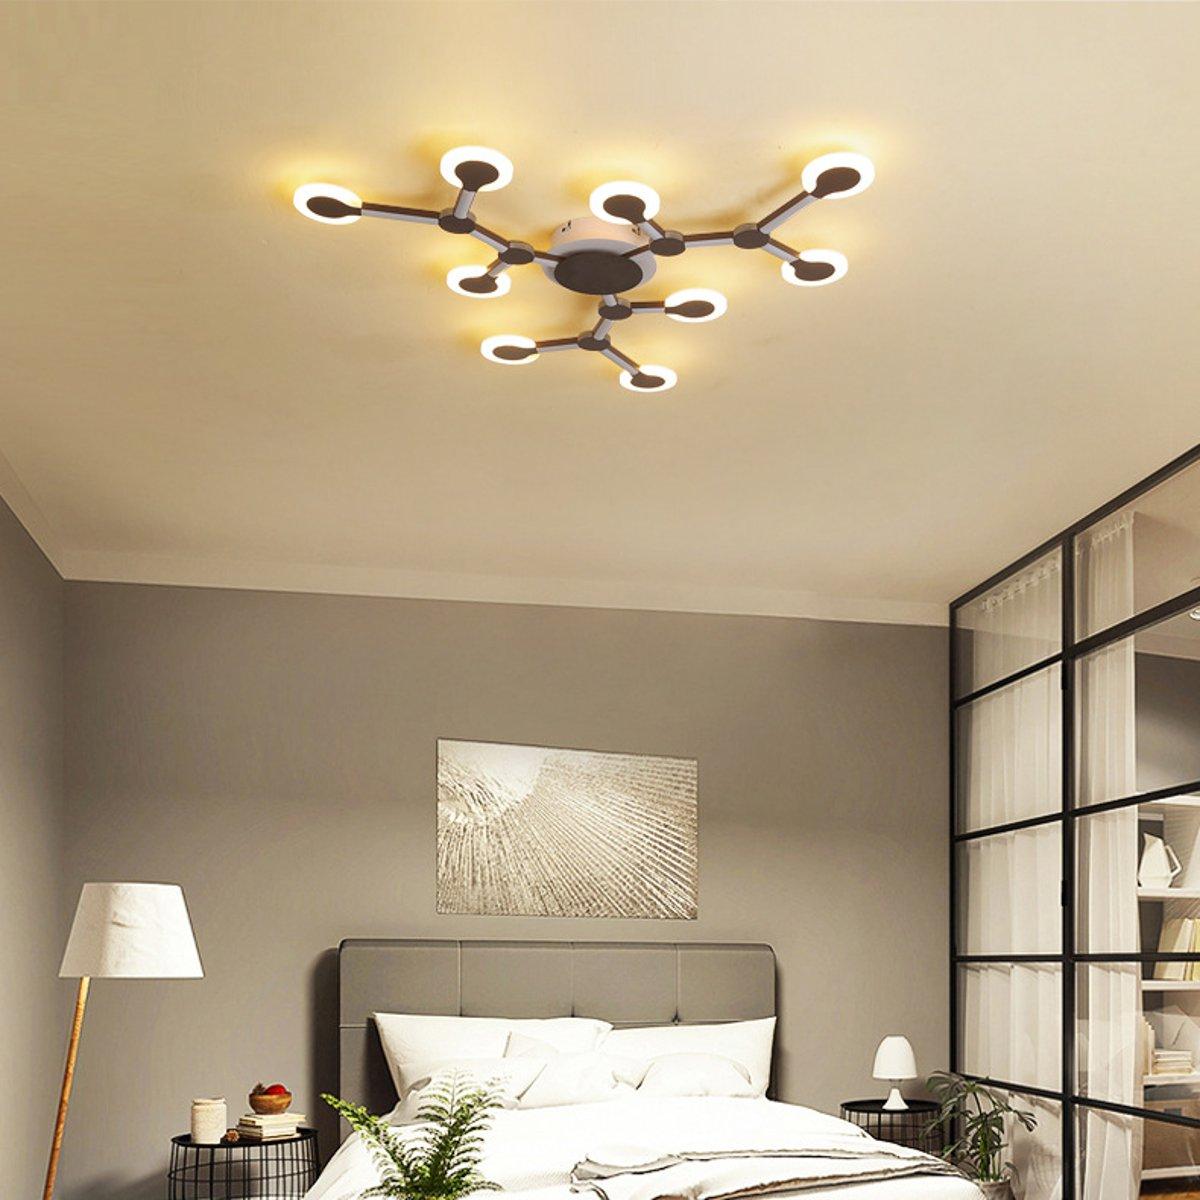 9 Heads Acrylic Led Ceiling Light Pendant Lamp Hallway Bedroom Dimmable Fixture